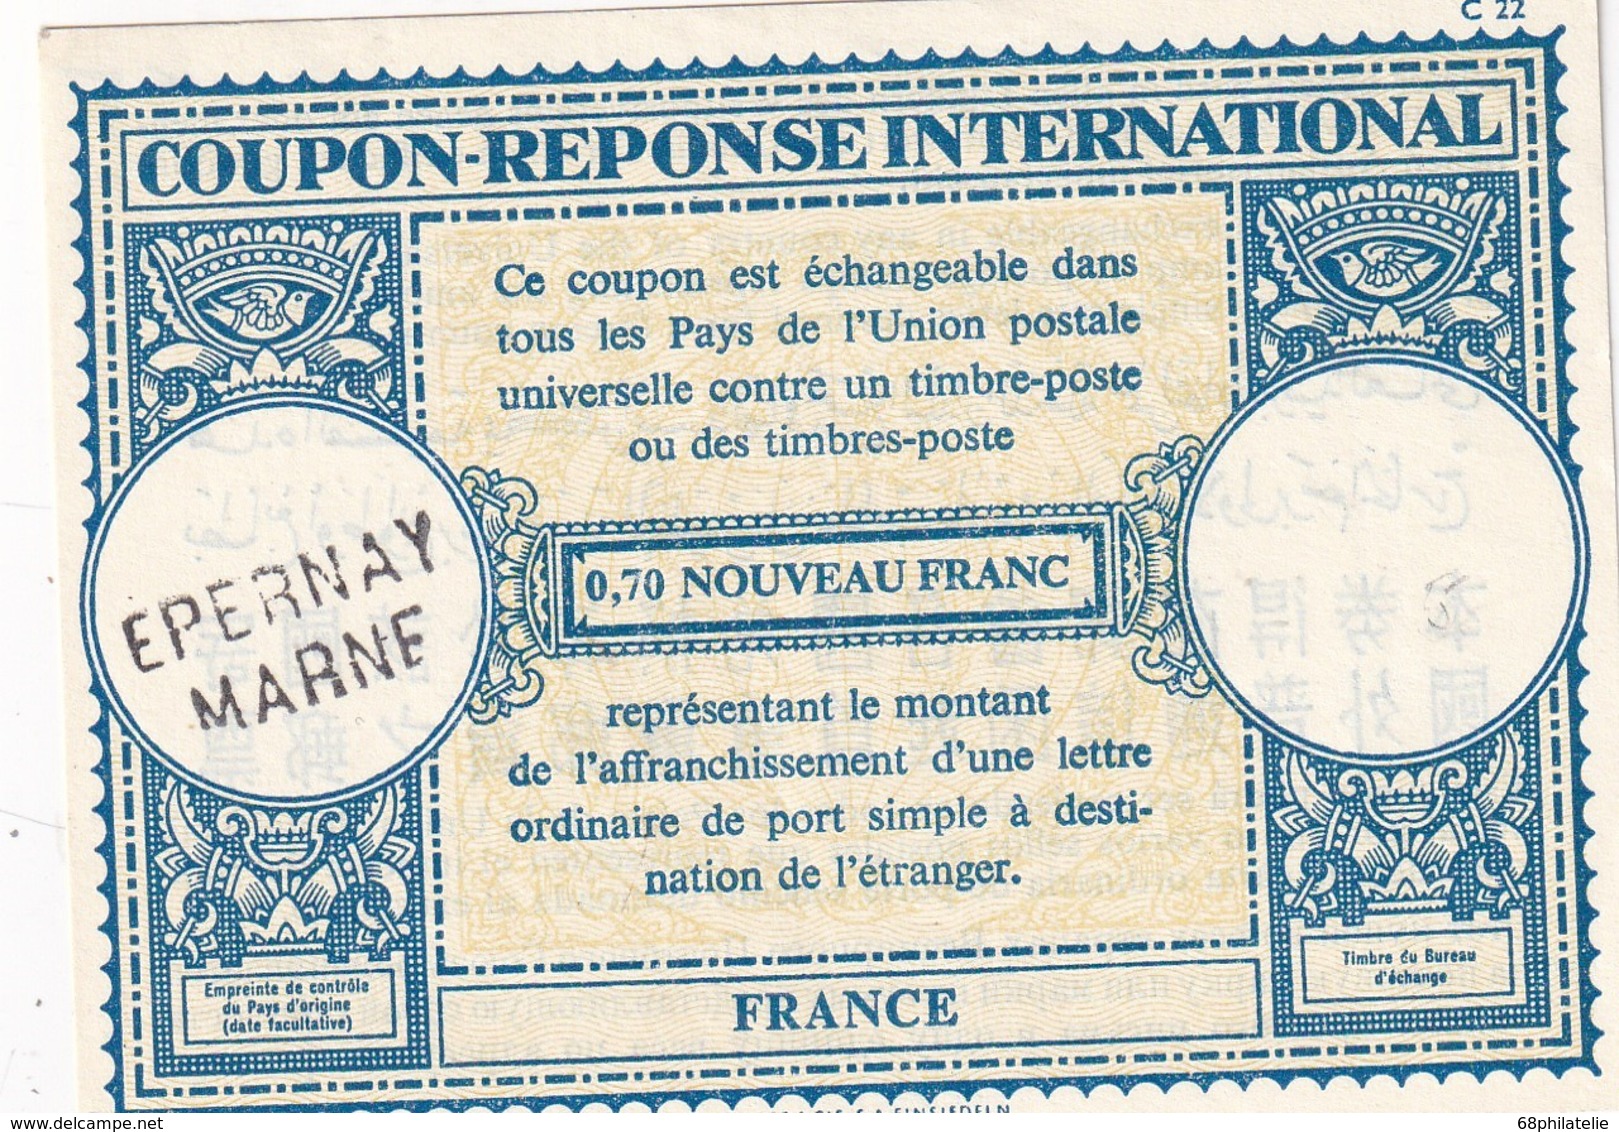 FRANCE     ENTIER POSTAL  /GANZSACHE/POSTAL STATIONERY   COUPON REPONSE INTERNATIONAL DE EPERNAY - Reply Coupons